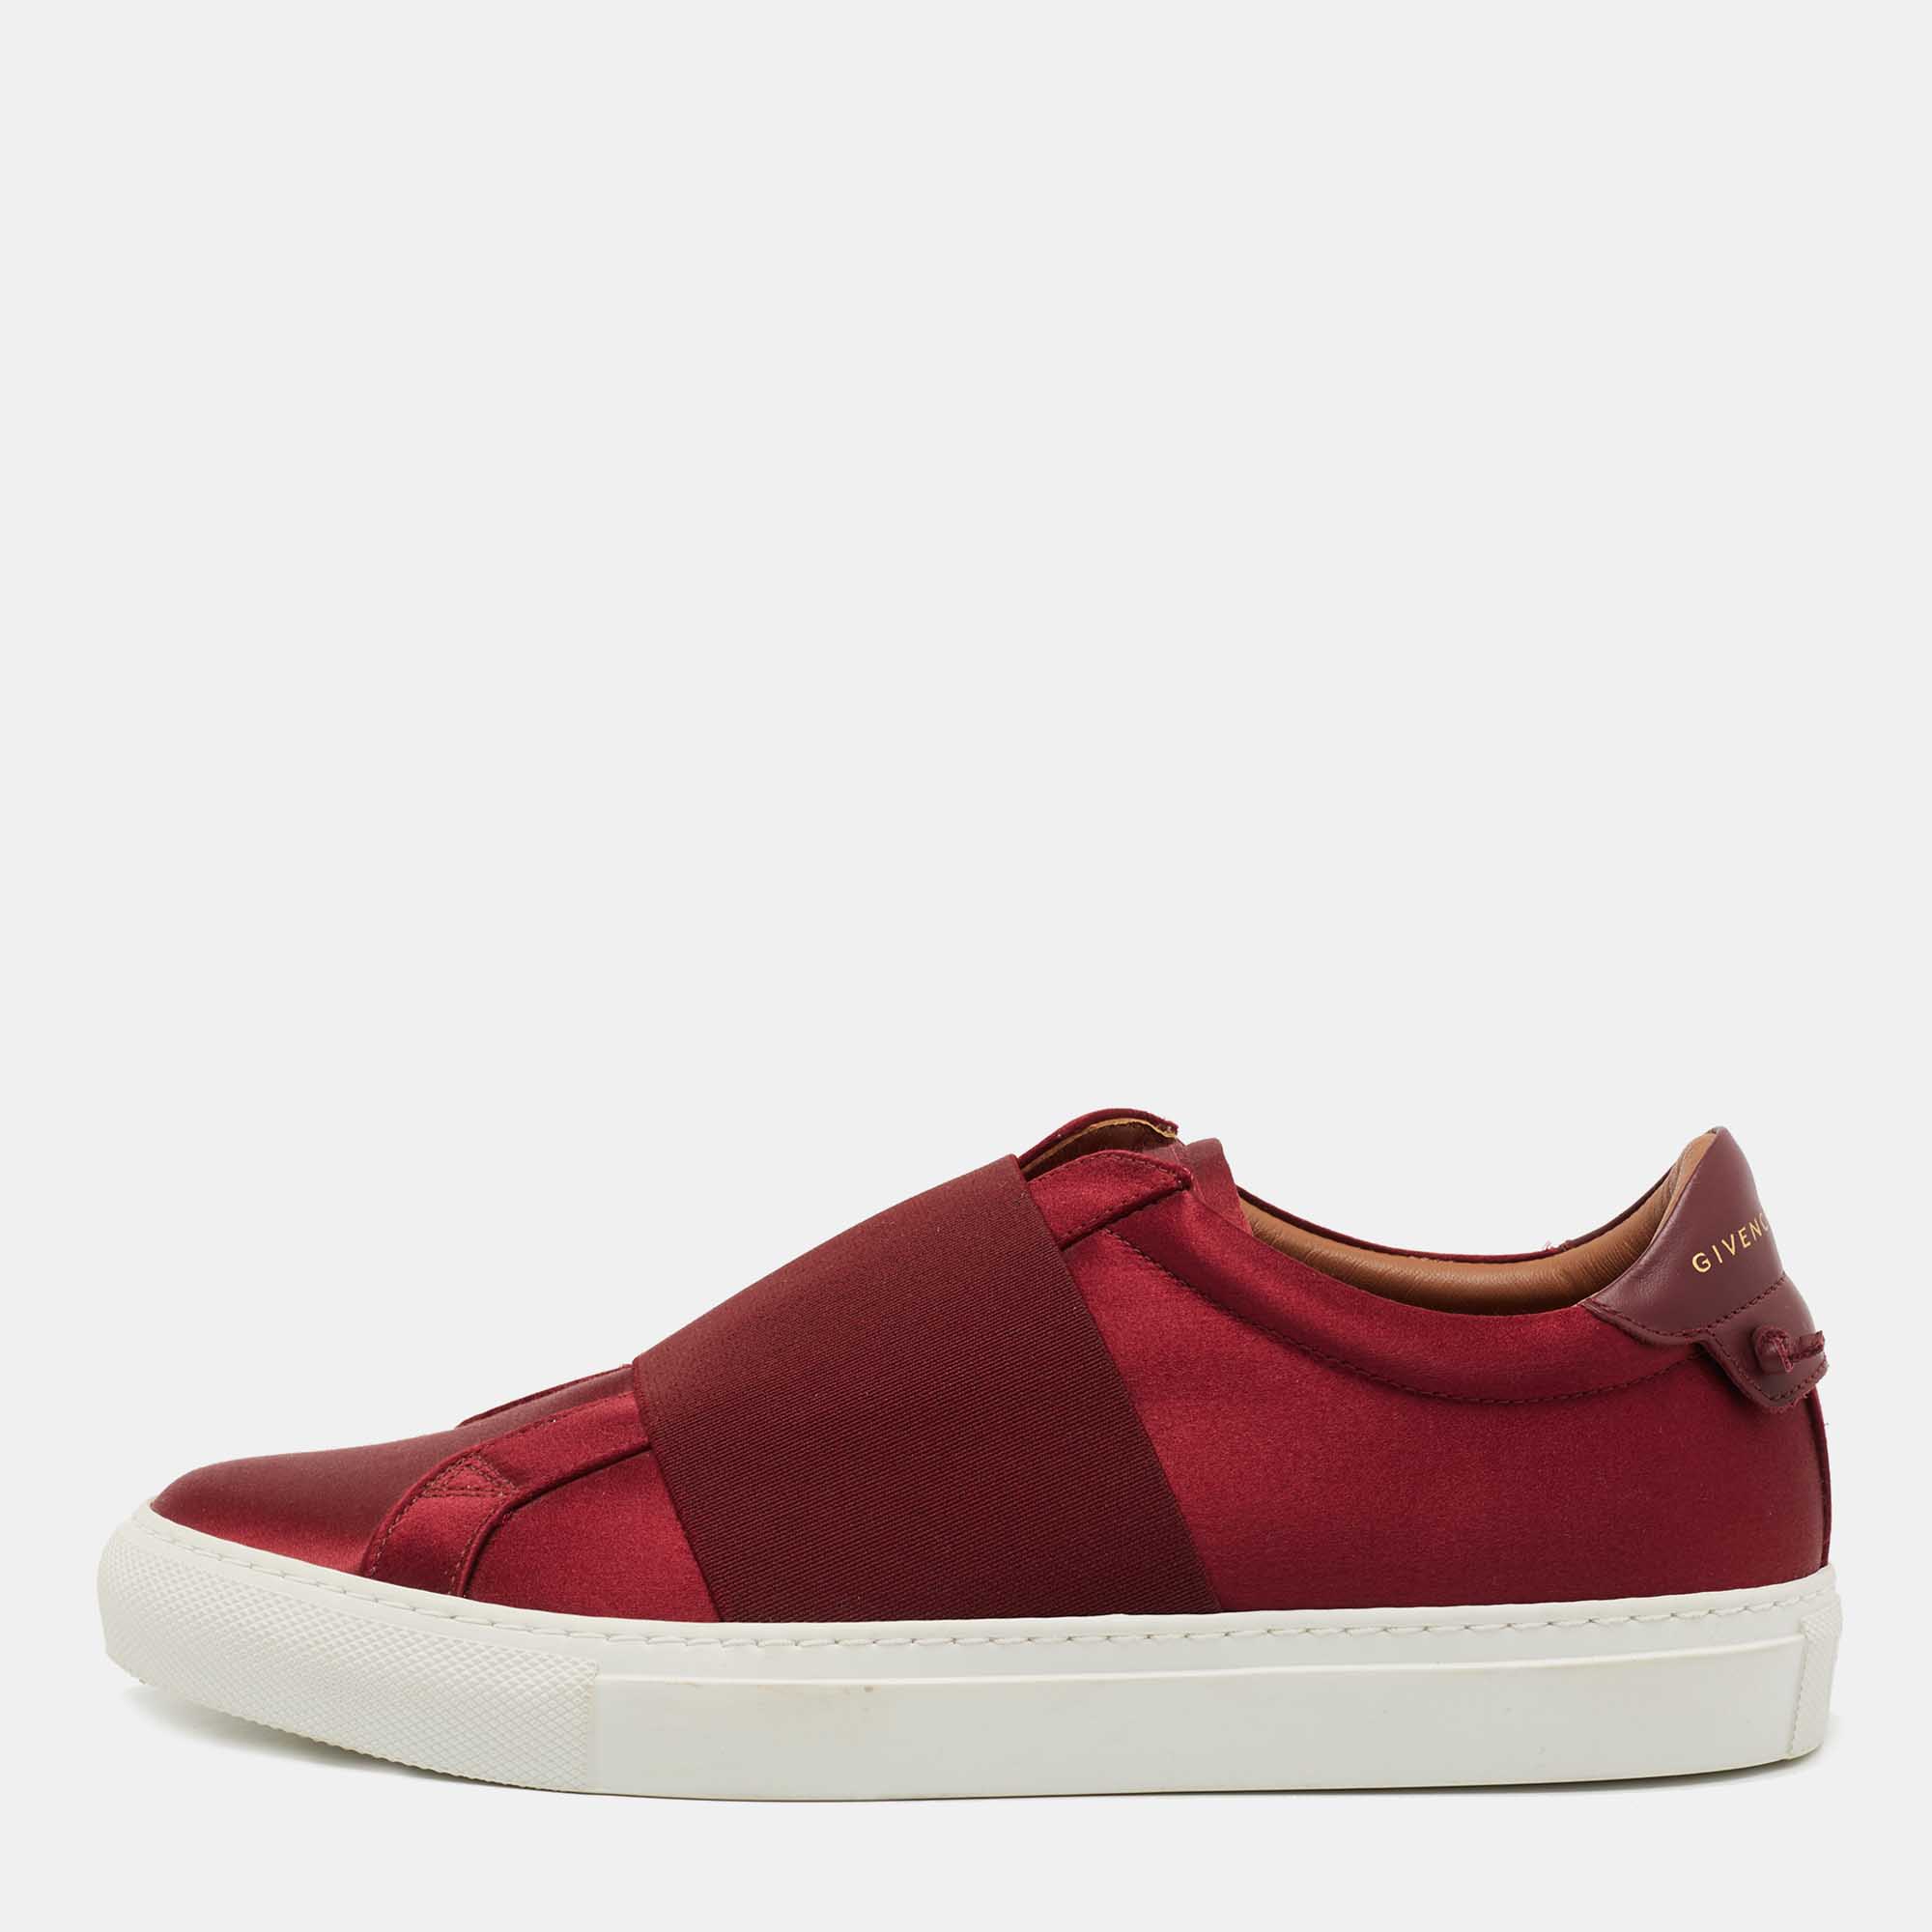 Pre-owned Givenchy Burgundy Satin And Elastic Band Slip On Trainers Size 40